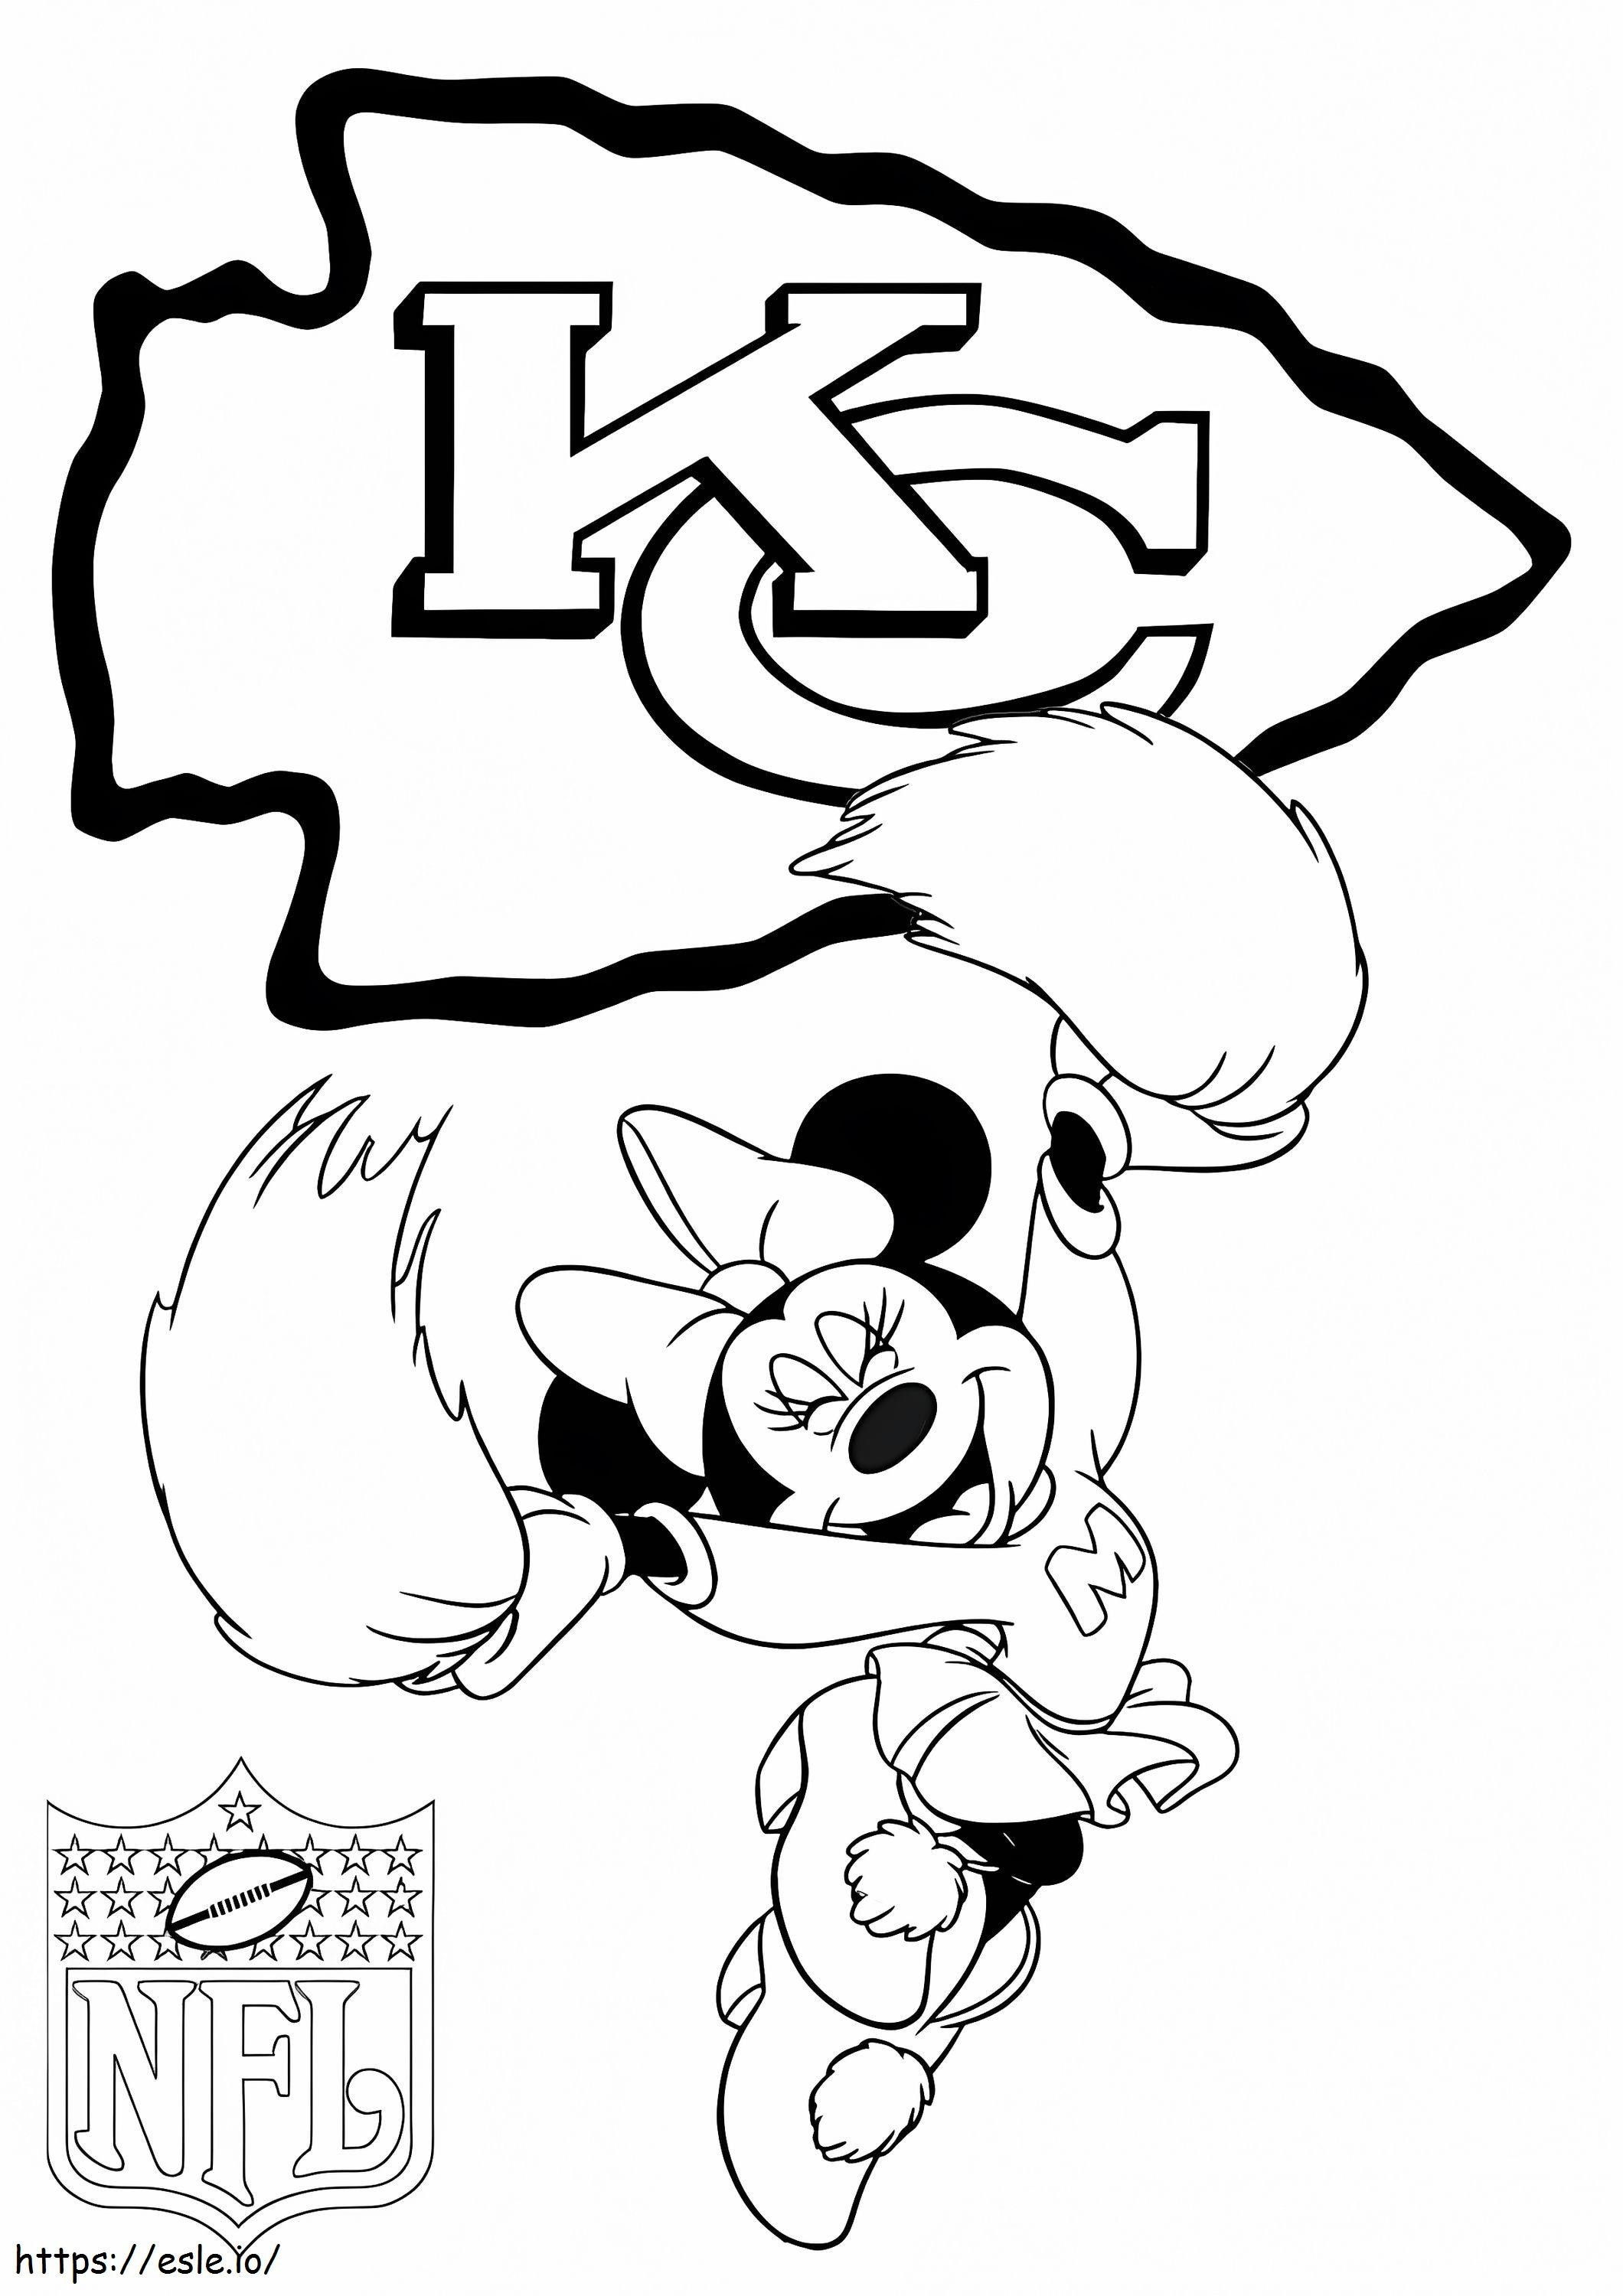 Kansas City Chiefs With Minnie Mouse coloring page